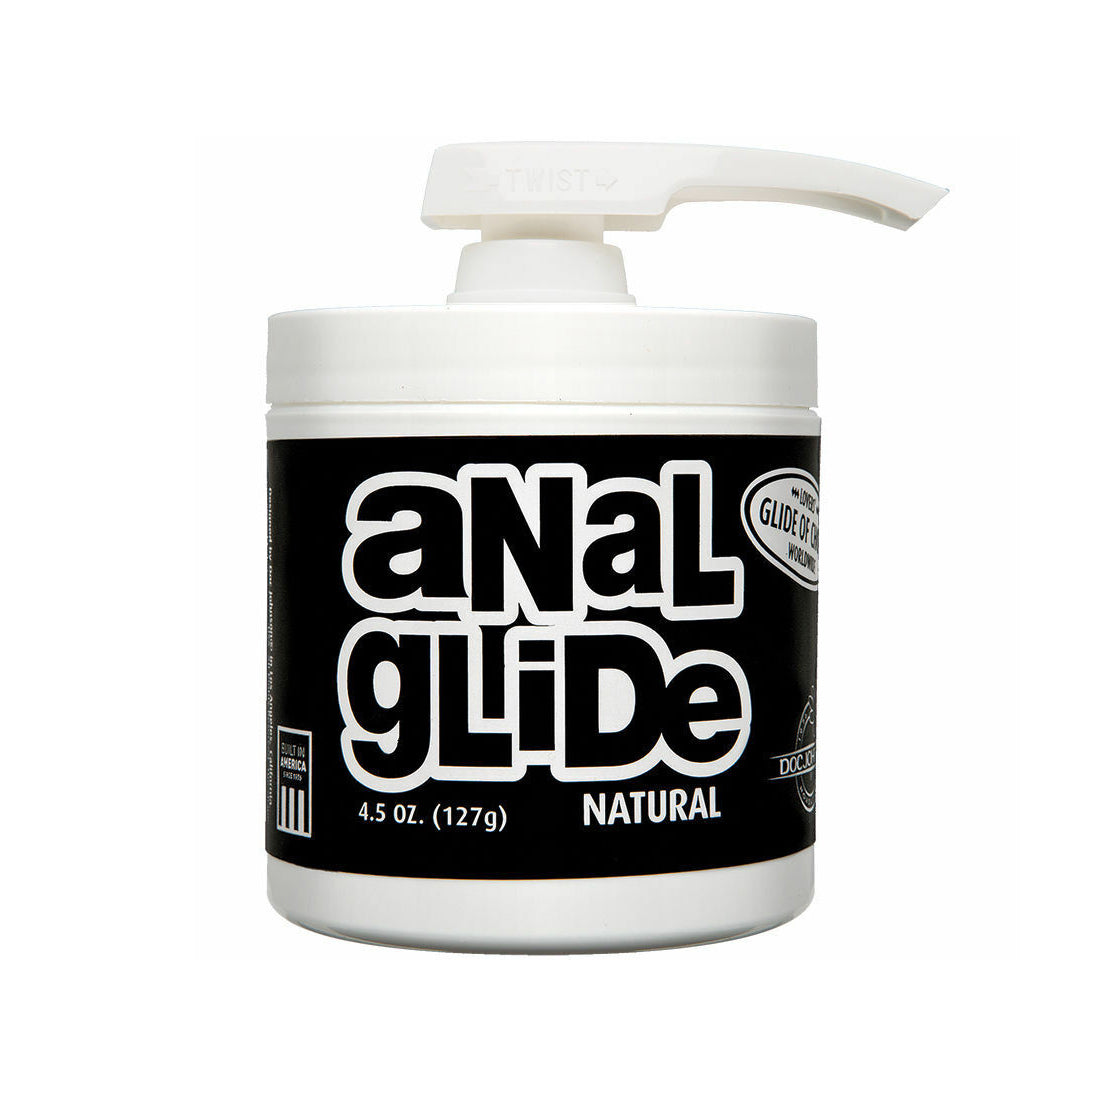 Anal Glide Natural Personal Lube Lubricant 4.5 oz KY